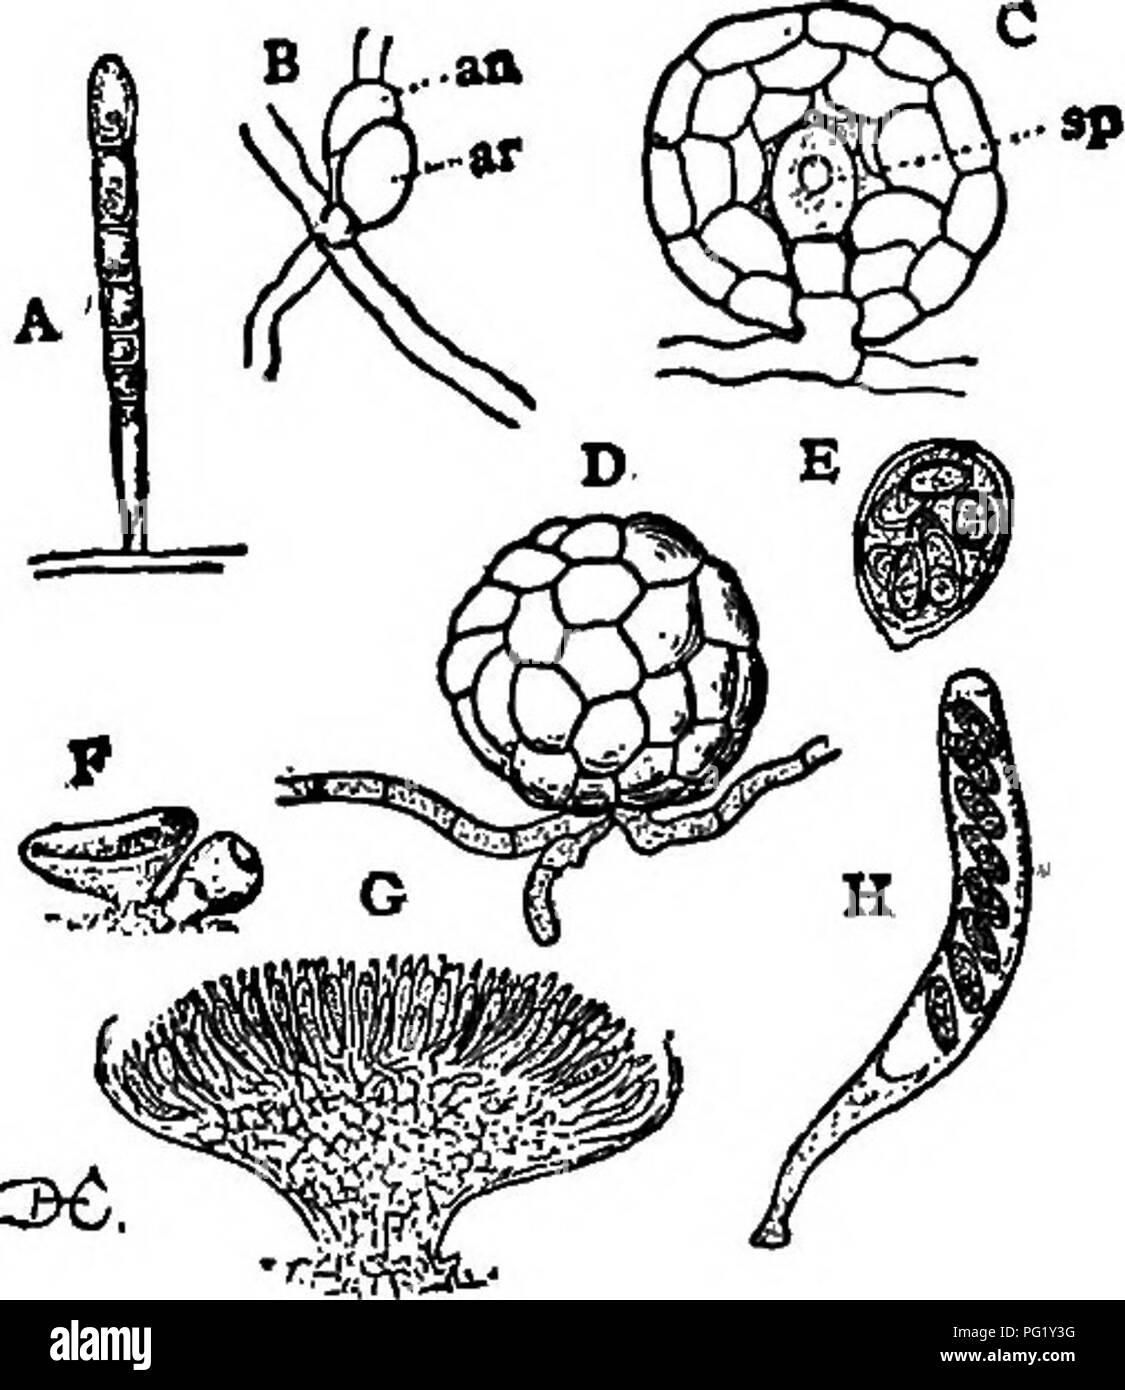 . Lectures on the evolution of plants. Botany; Plants. THE FUNGI 91. arrangement; but in all the higher ones they are borne in definite spore-fruits of characteristic form. This spore- fruit is undoubtedly, in many instances, the result of fertilization, being pro- duced by the formation of a peculiar cell, the archi- carp, which corresponds to the oogonium of the Phy- comycetes. This is usually fertilized by direct contact with the antheridium, and from it, more or less di- rectly, are produced the spore-sacs or asci. A good example of these simpler Ascomycetes is offered by the mildews which Stock Photo